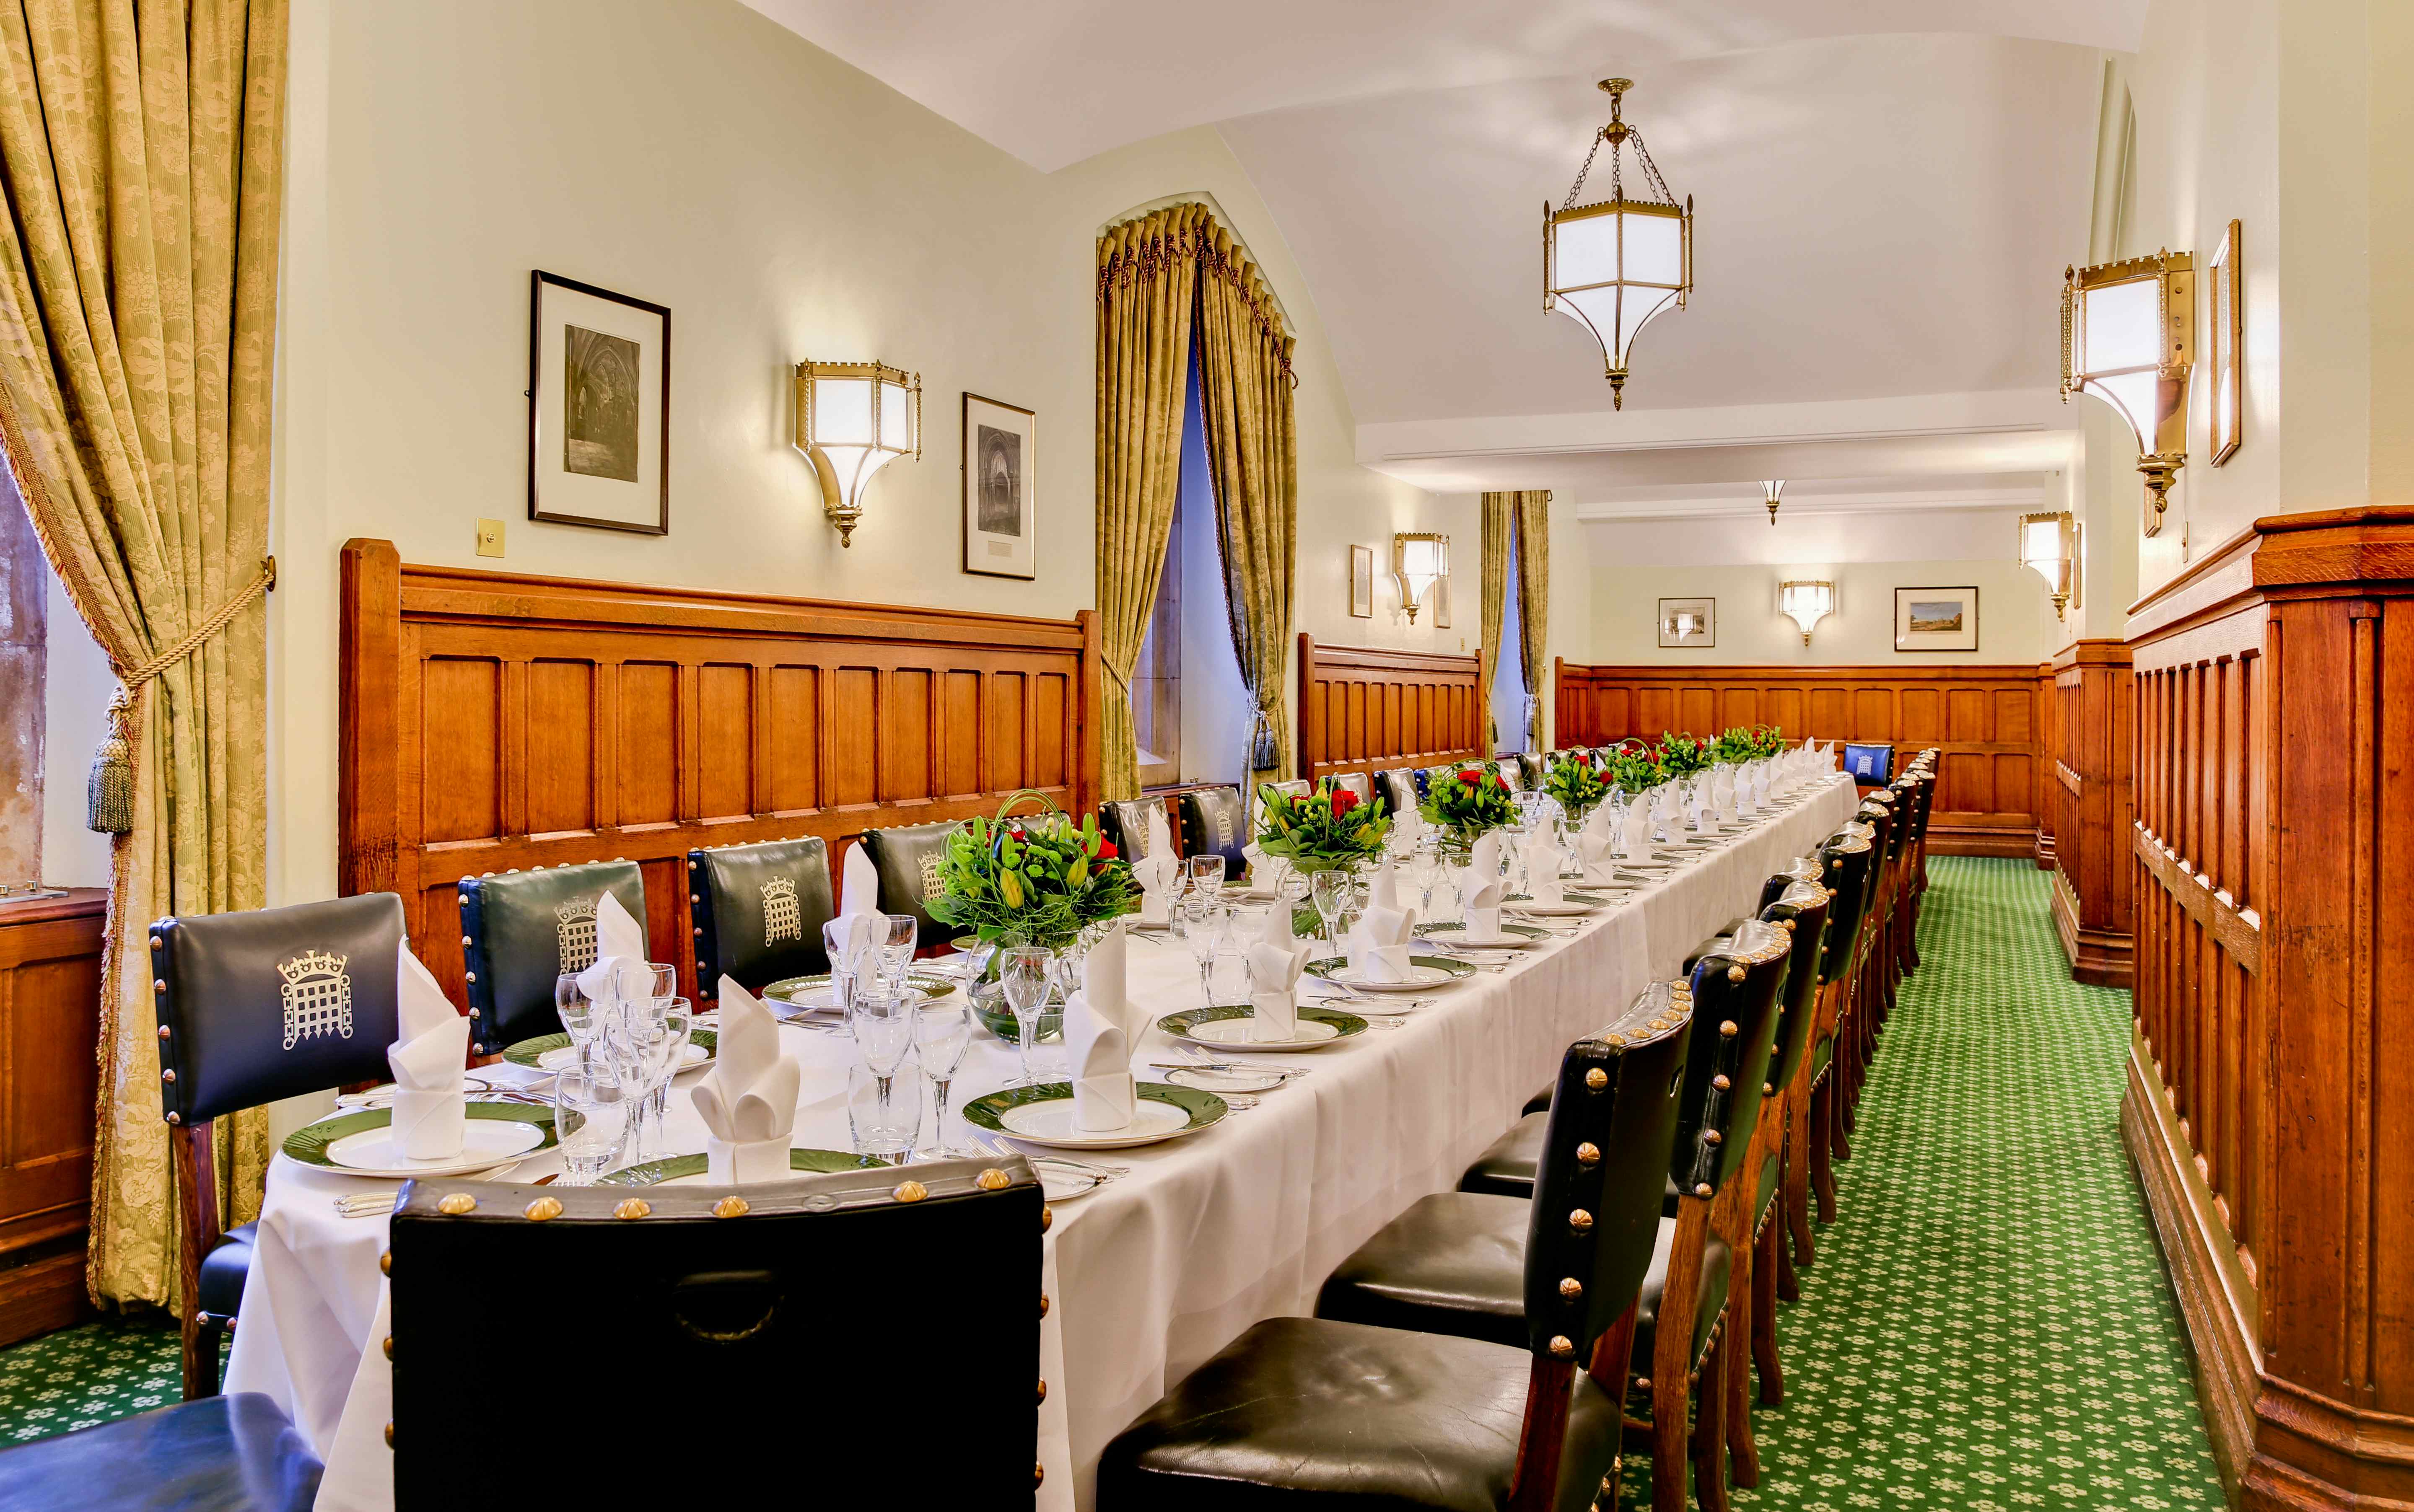 Terrace Dining Room A , House of Commons